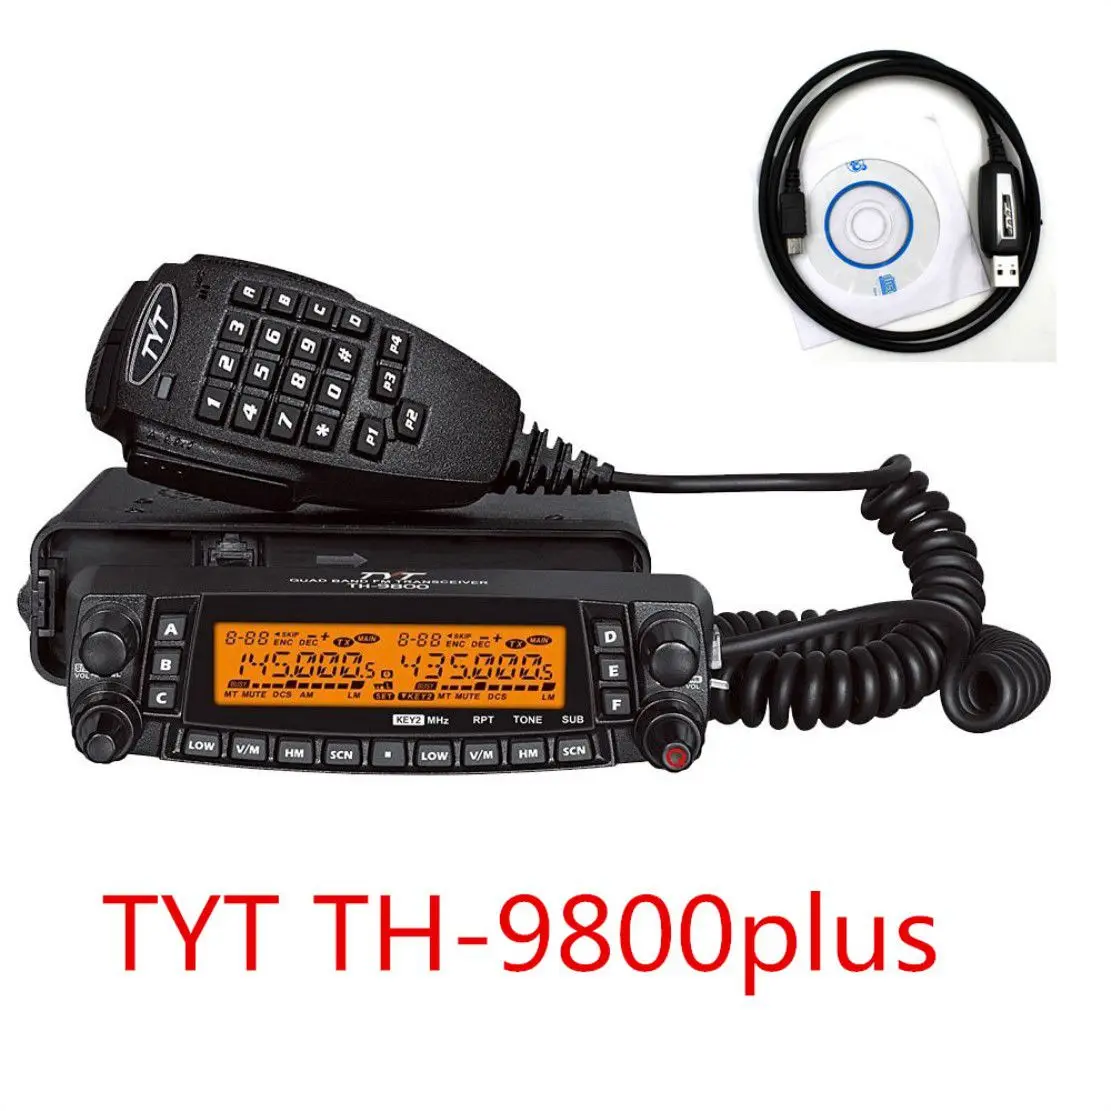 

(DHL Shipping) Newest 1806A TYT TH 9800 Plus (Updated) Quad Band Mobile Radio TH 9800 Car Transceiver TH9800 Walkie Talkie